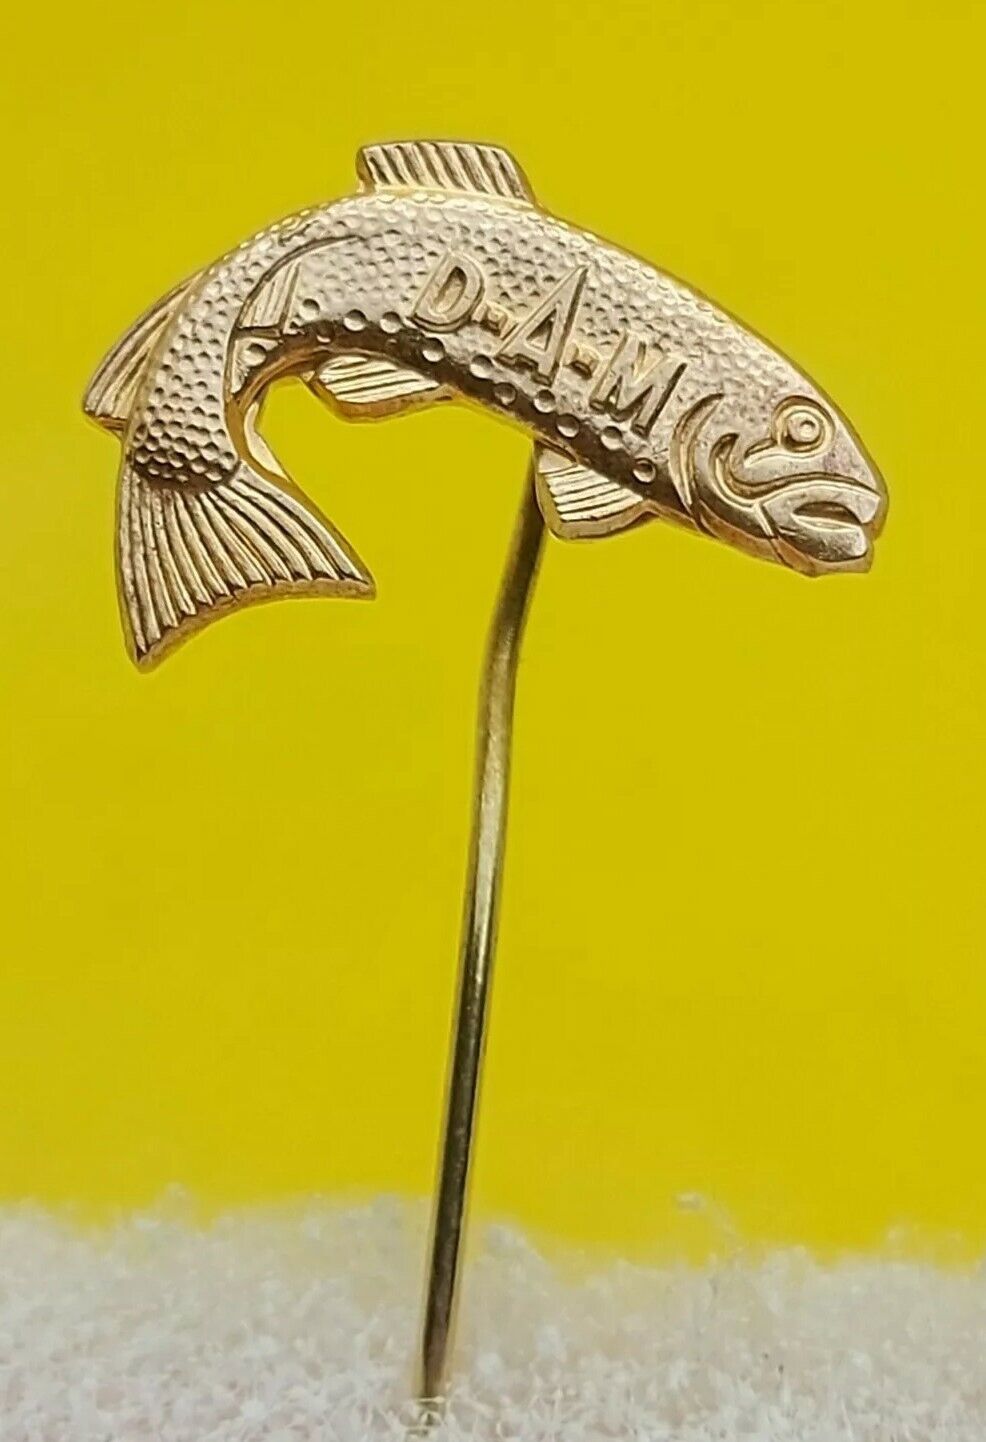 D•A•M - Quick ® Reels MAD Rods & Garments ... DAM fishing old rare pin badge